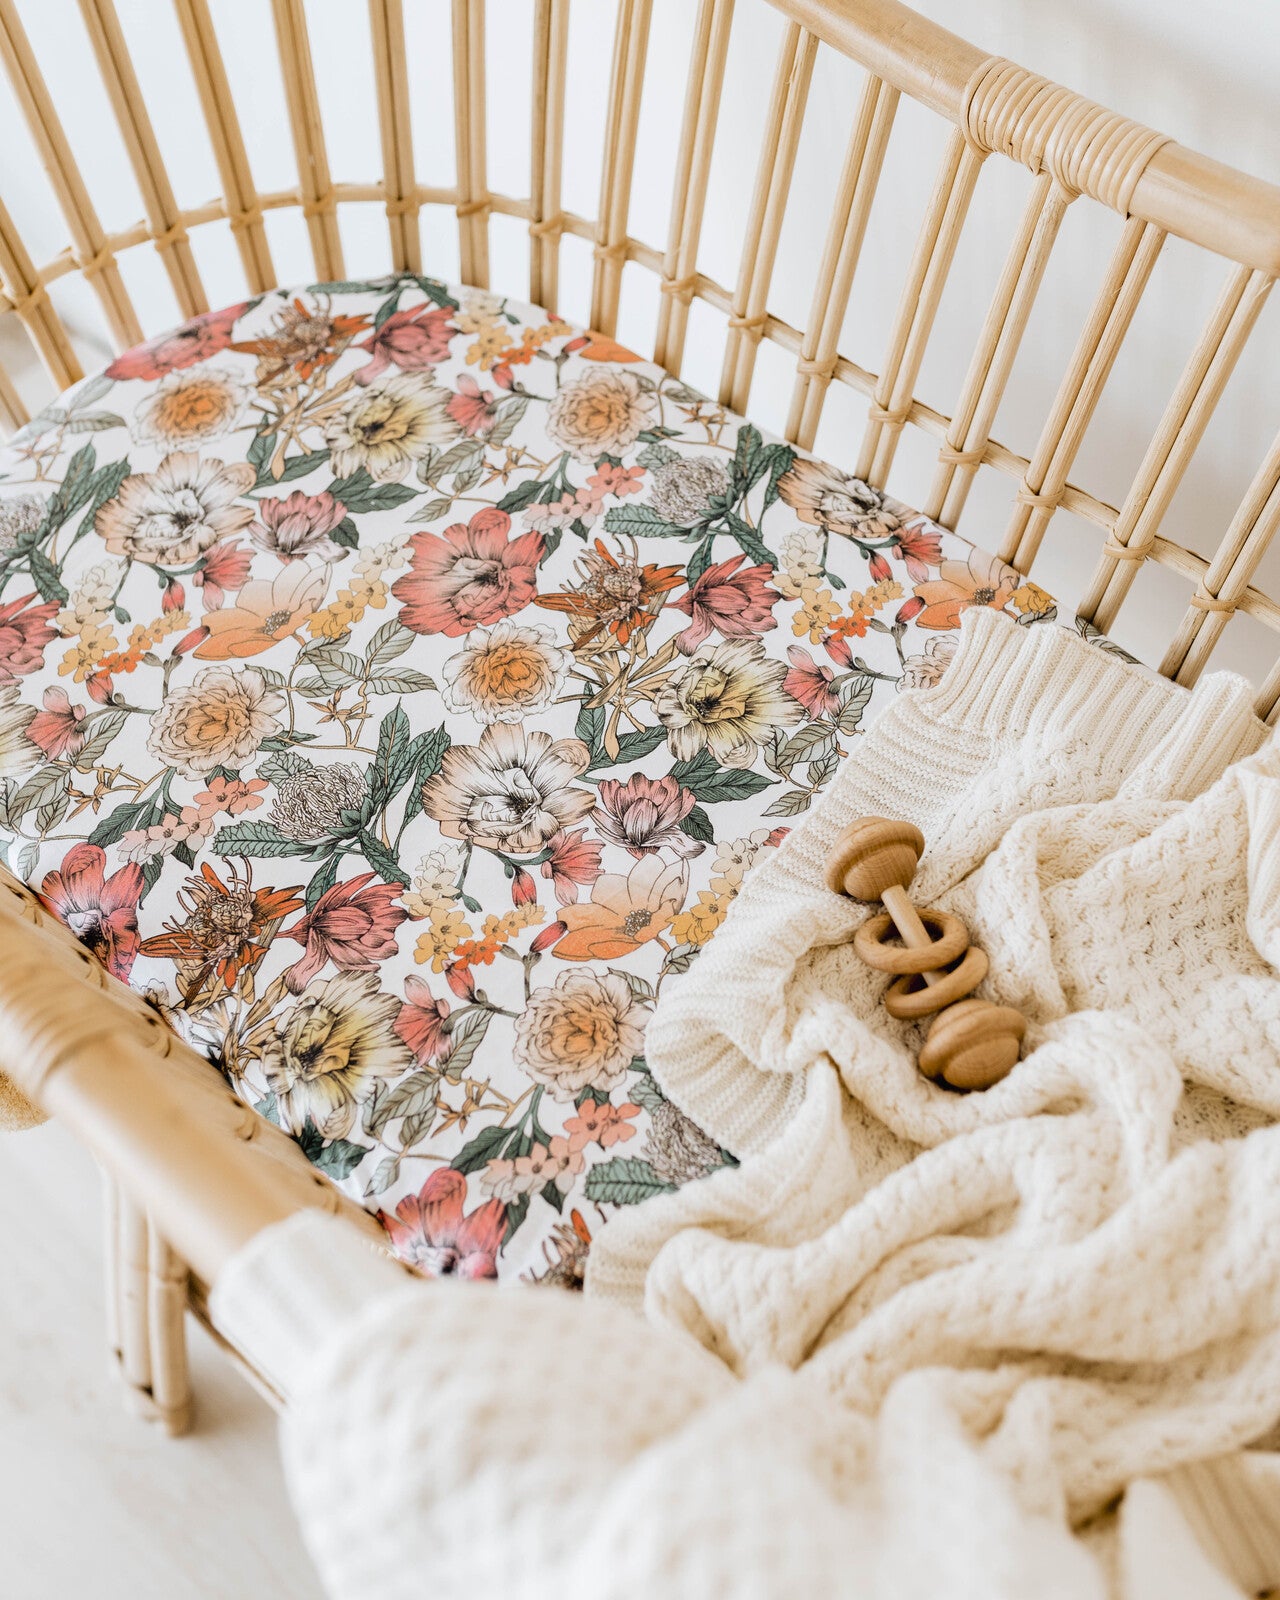 Cream Diamond Knit Baby Blanket from Snuggle Hunny Kids is now available on Sugarbird Kids